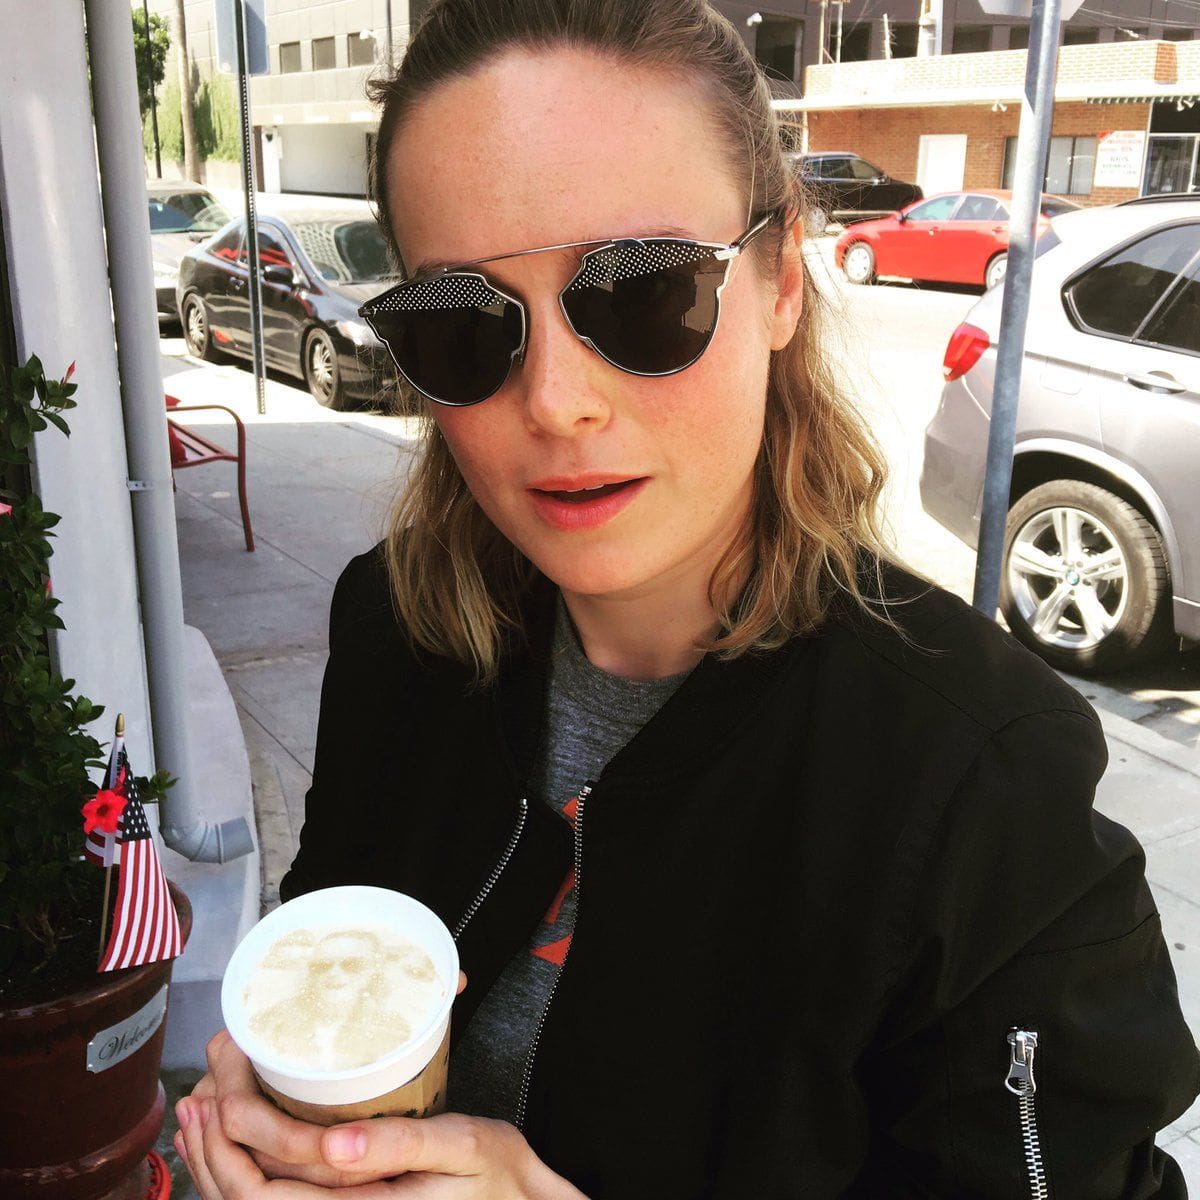 52 Hot And Sexy Pictures Of Brie Larson – Marvel’s Sexy Captain Marvel Heroine | Best Of Comic Books